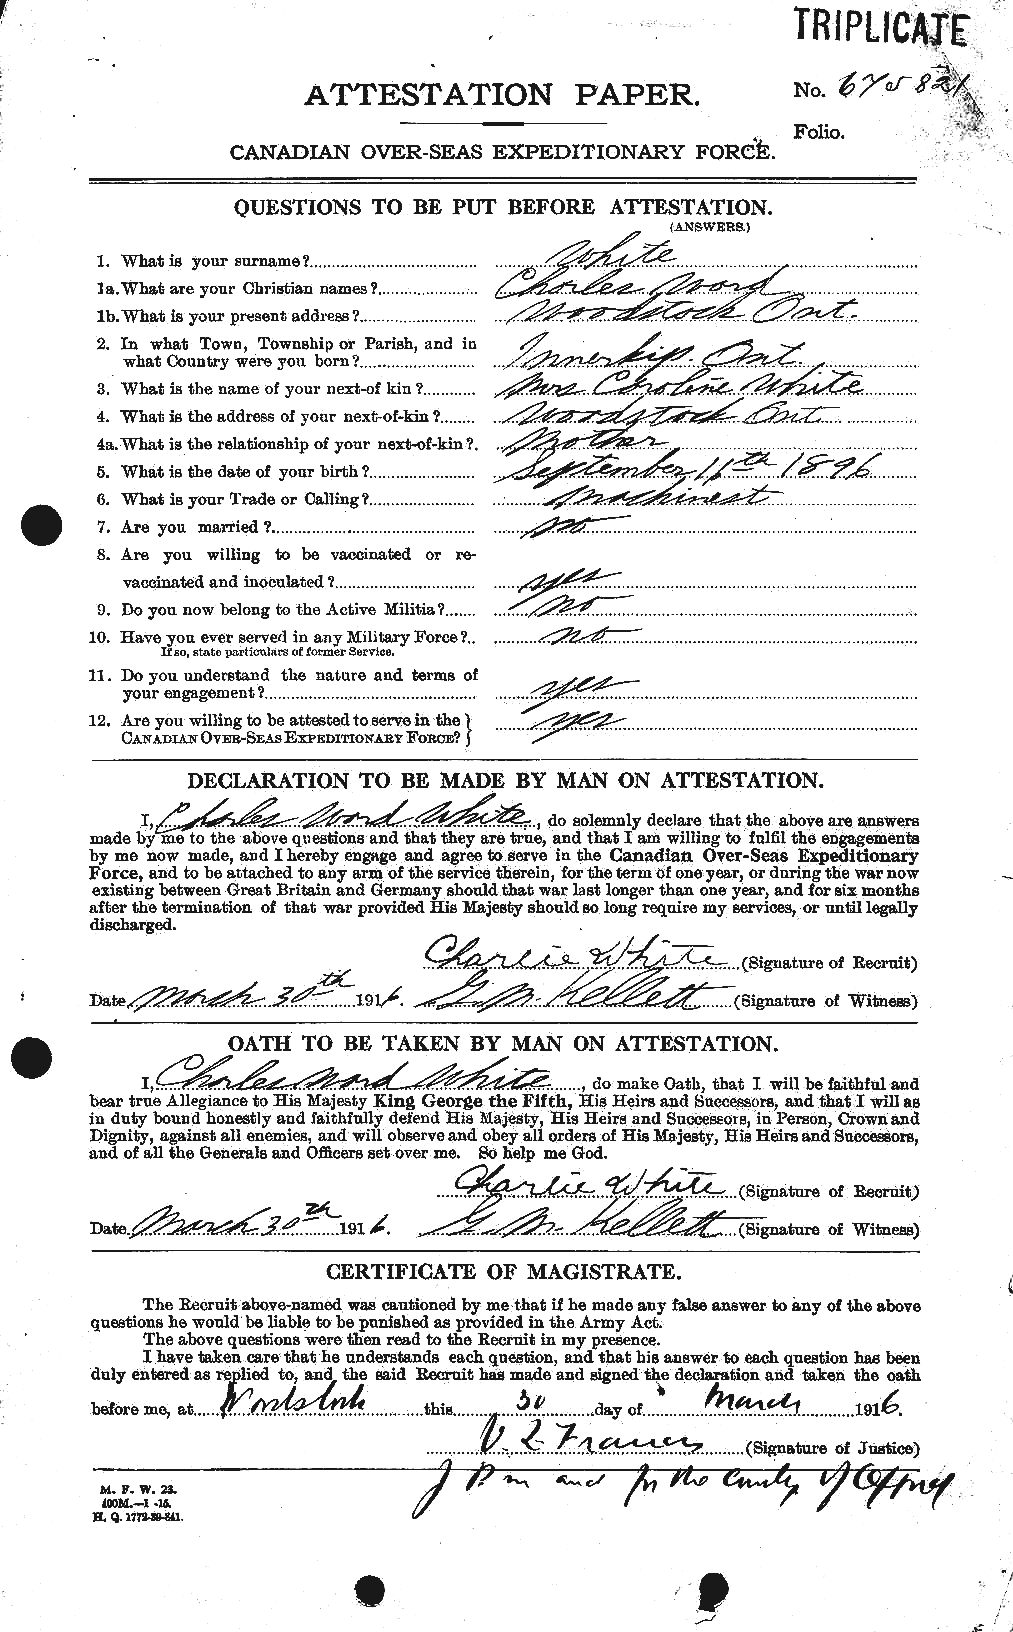 Personnel Records of the First World War - CEF 669965a